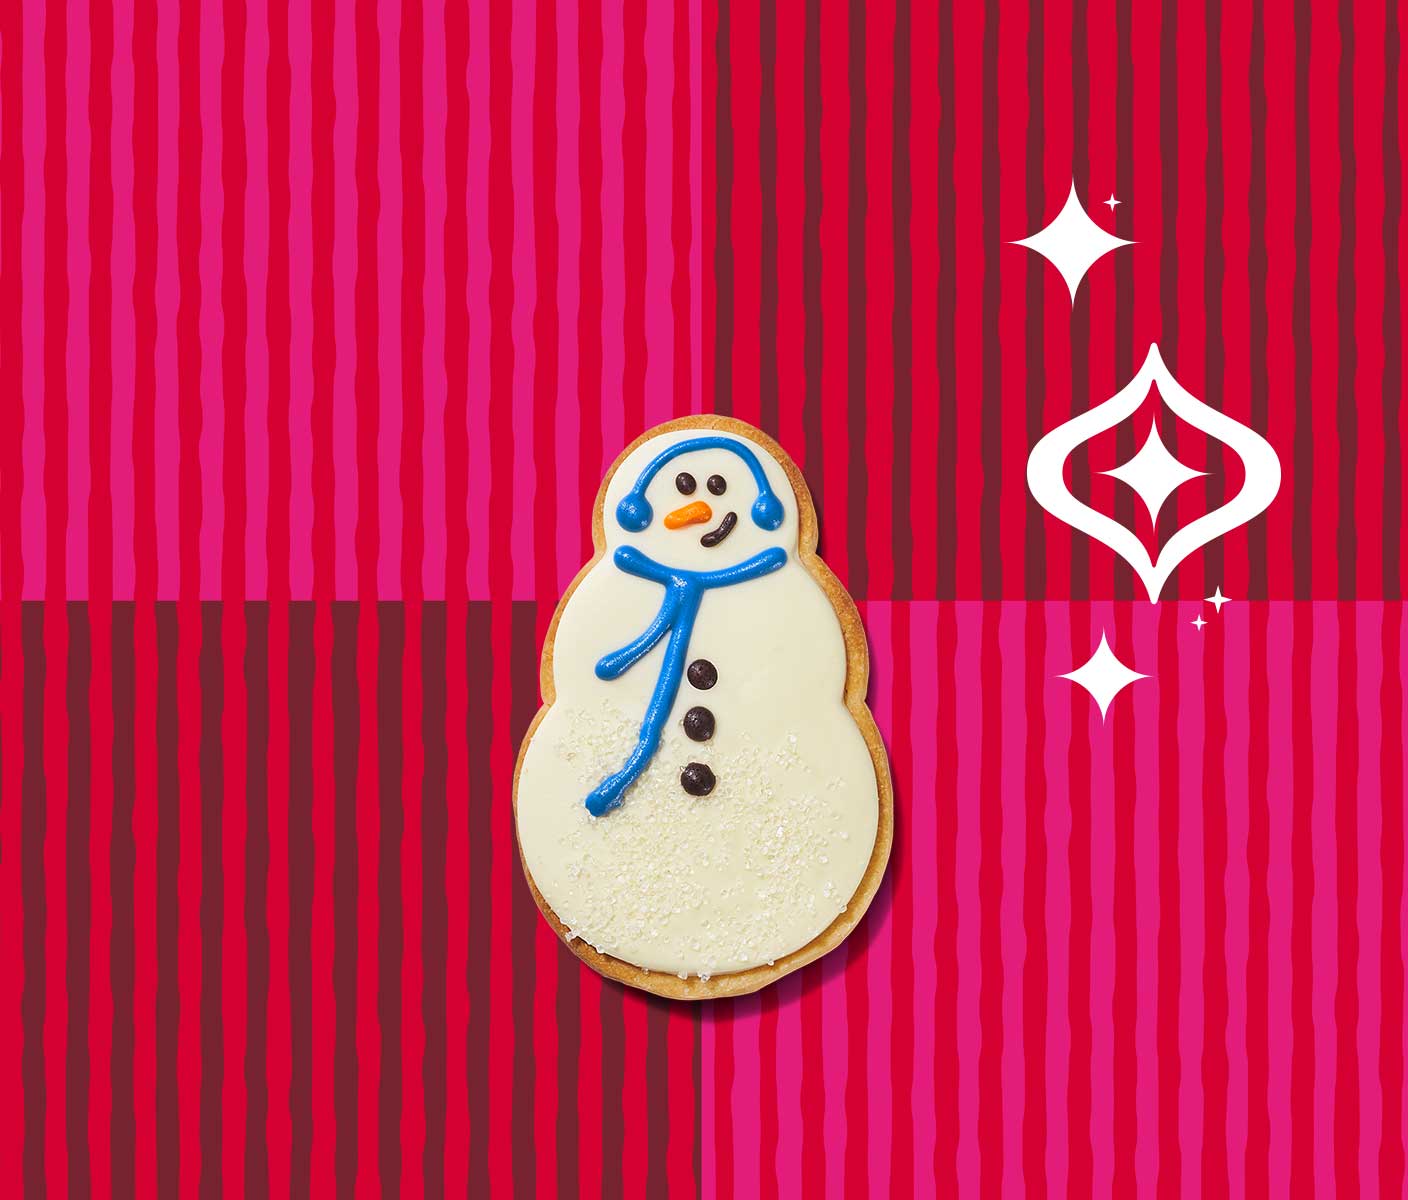 Snowman-shaped cookie, frosted and decorated to look like a snowman.